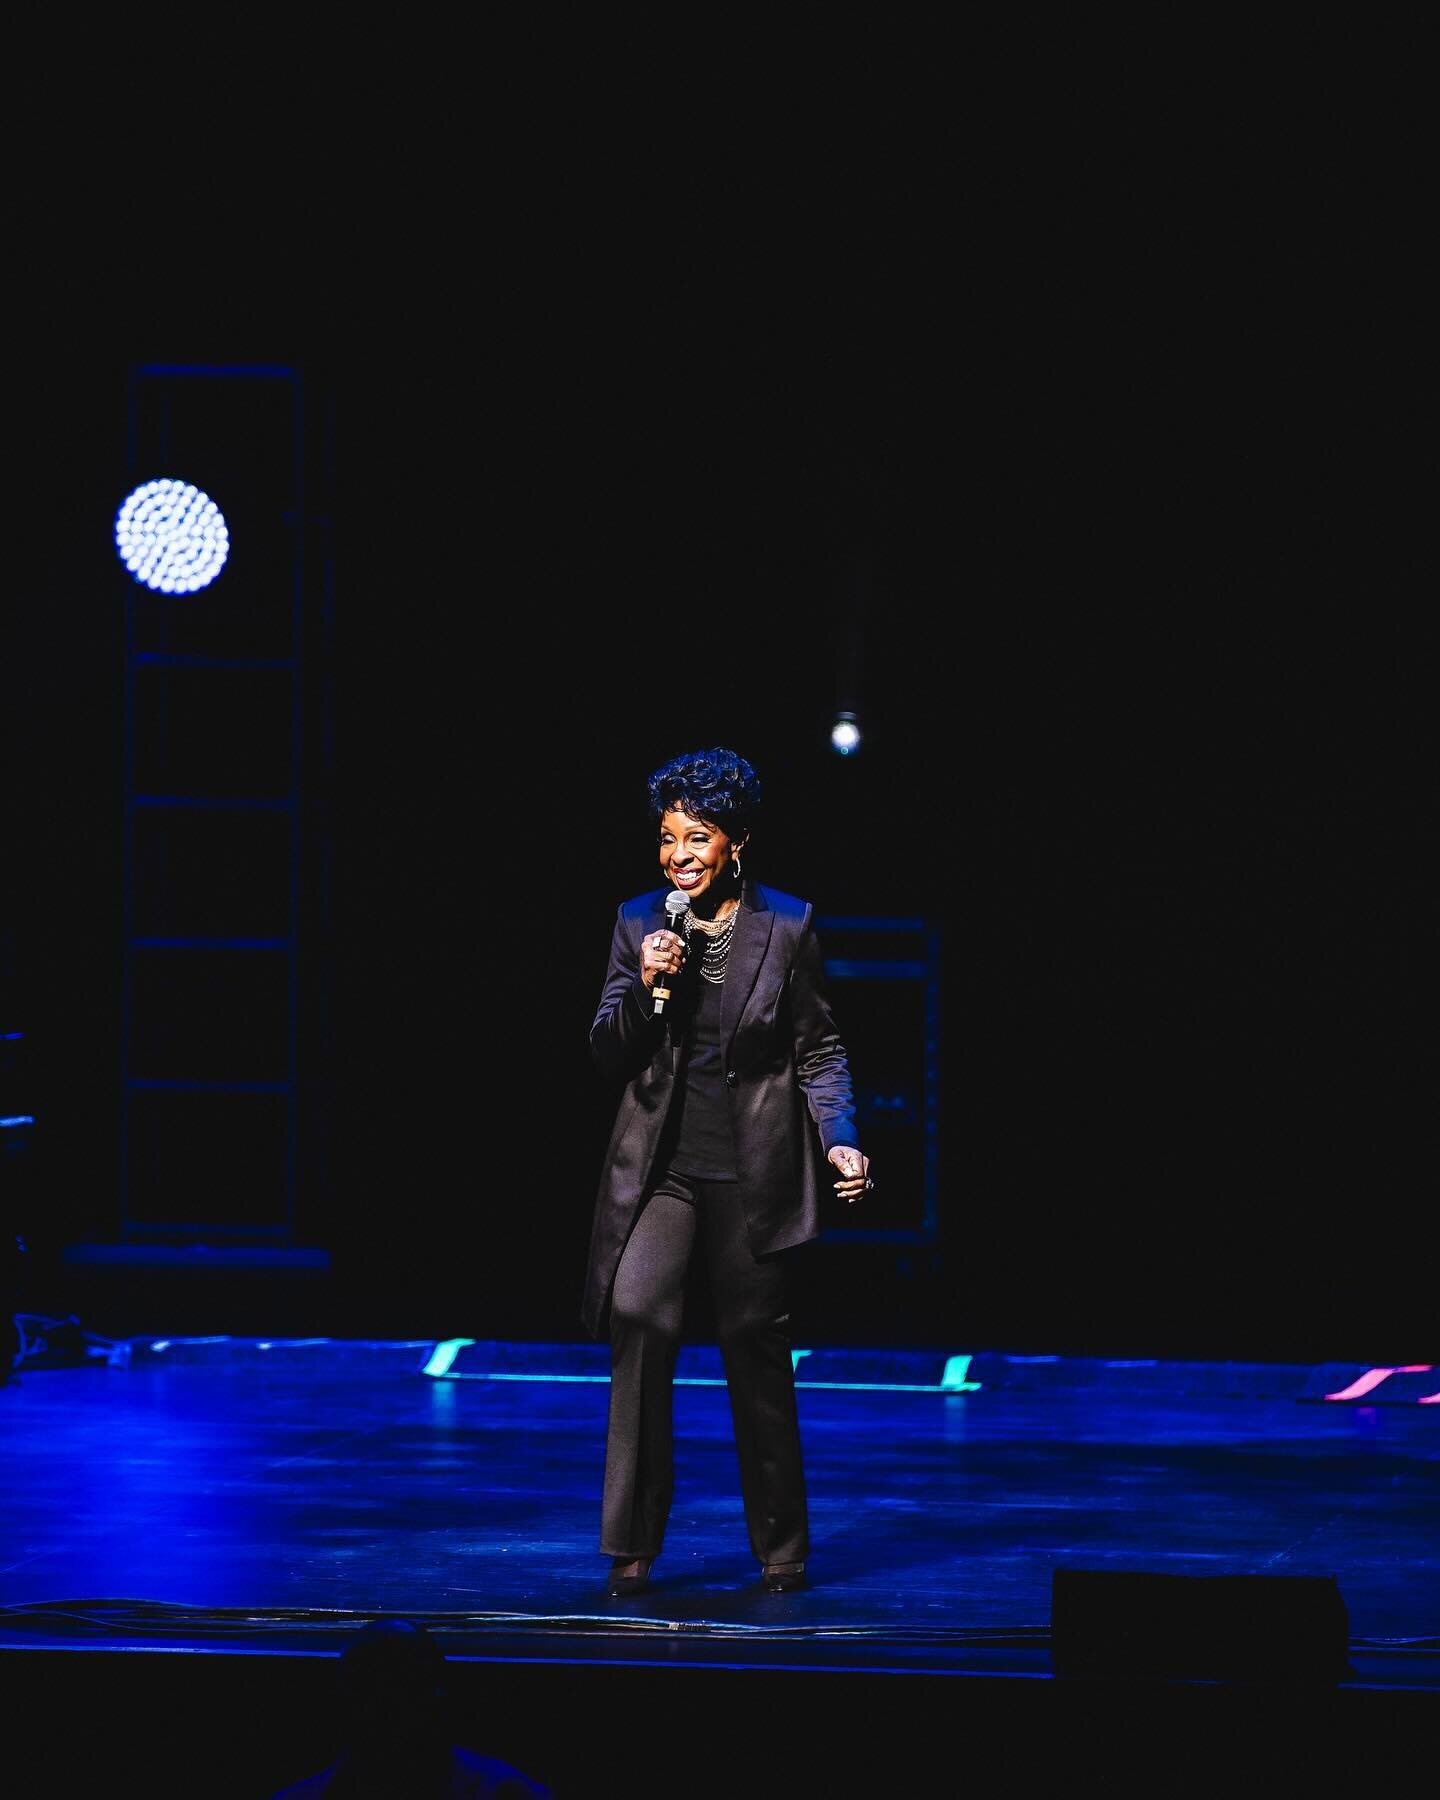 go check out our gallery on miss gladys knight ( @msgladysknight ) by our own @lantzmartin !!!